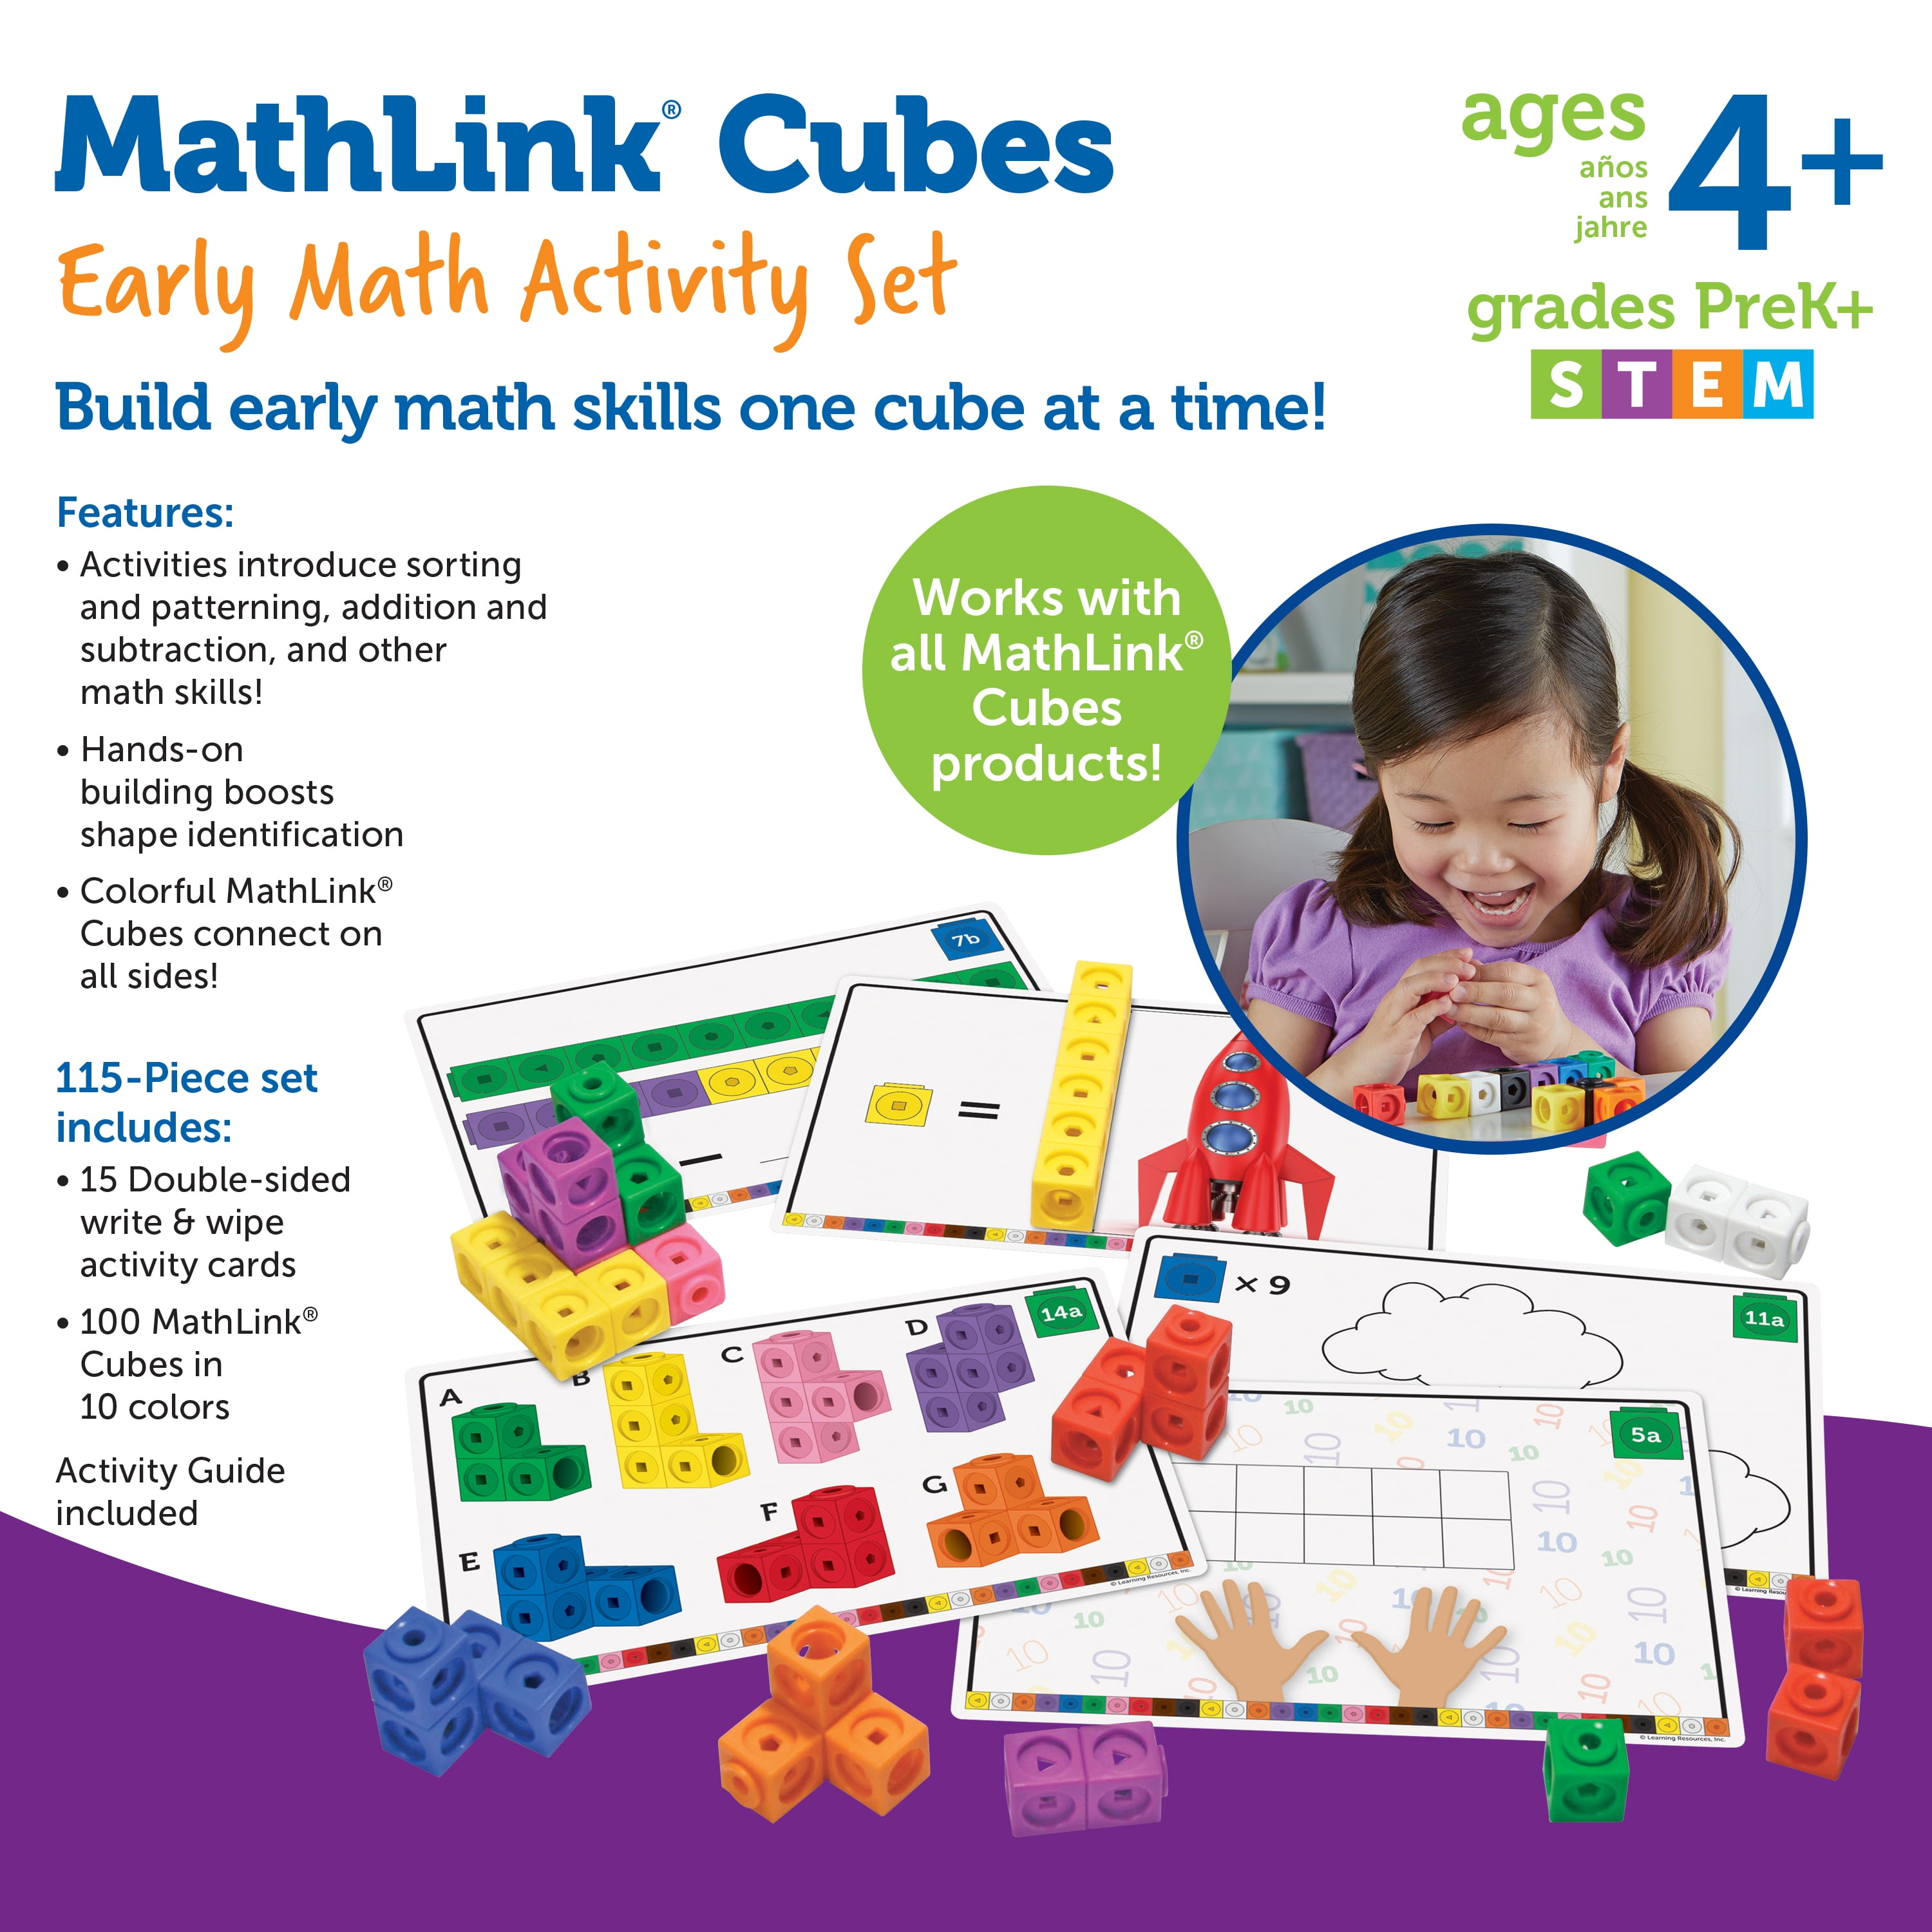 Early Gifts Manipulative Resources Colorful Mathlink Cubes Math Starter 